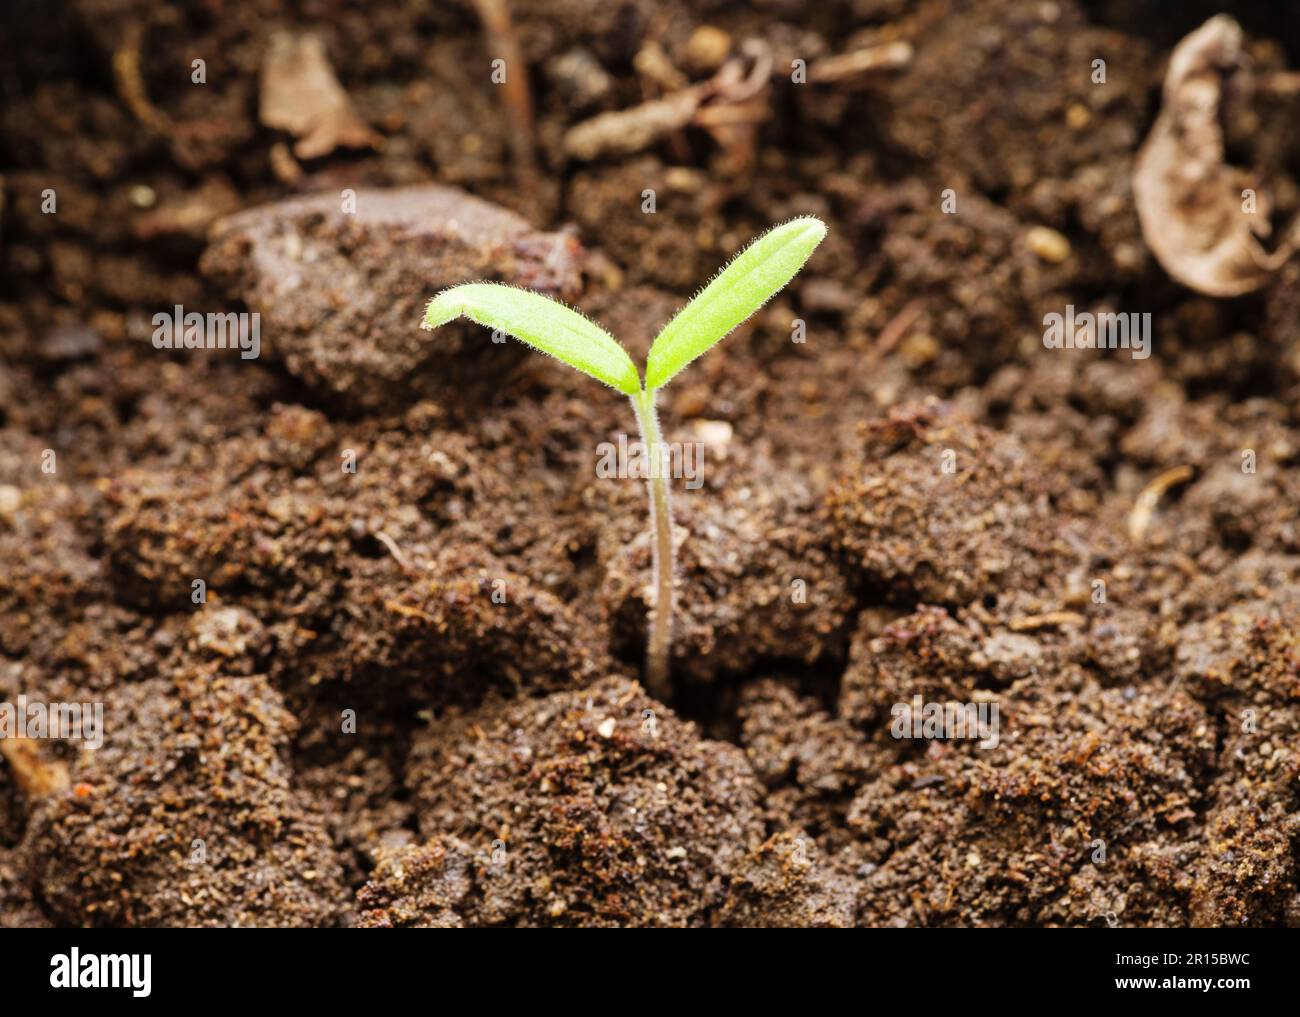 tomato seedling growing up from soil Stock Photo